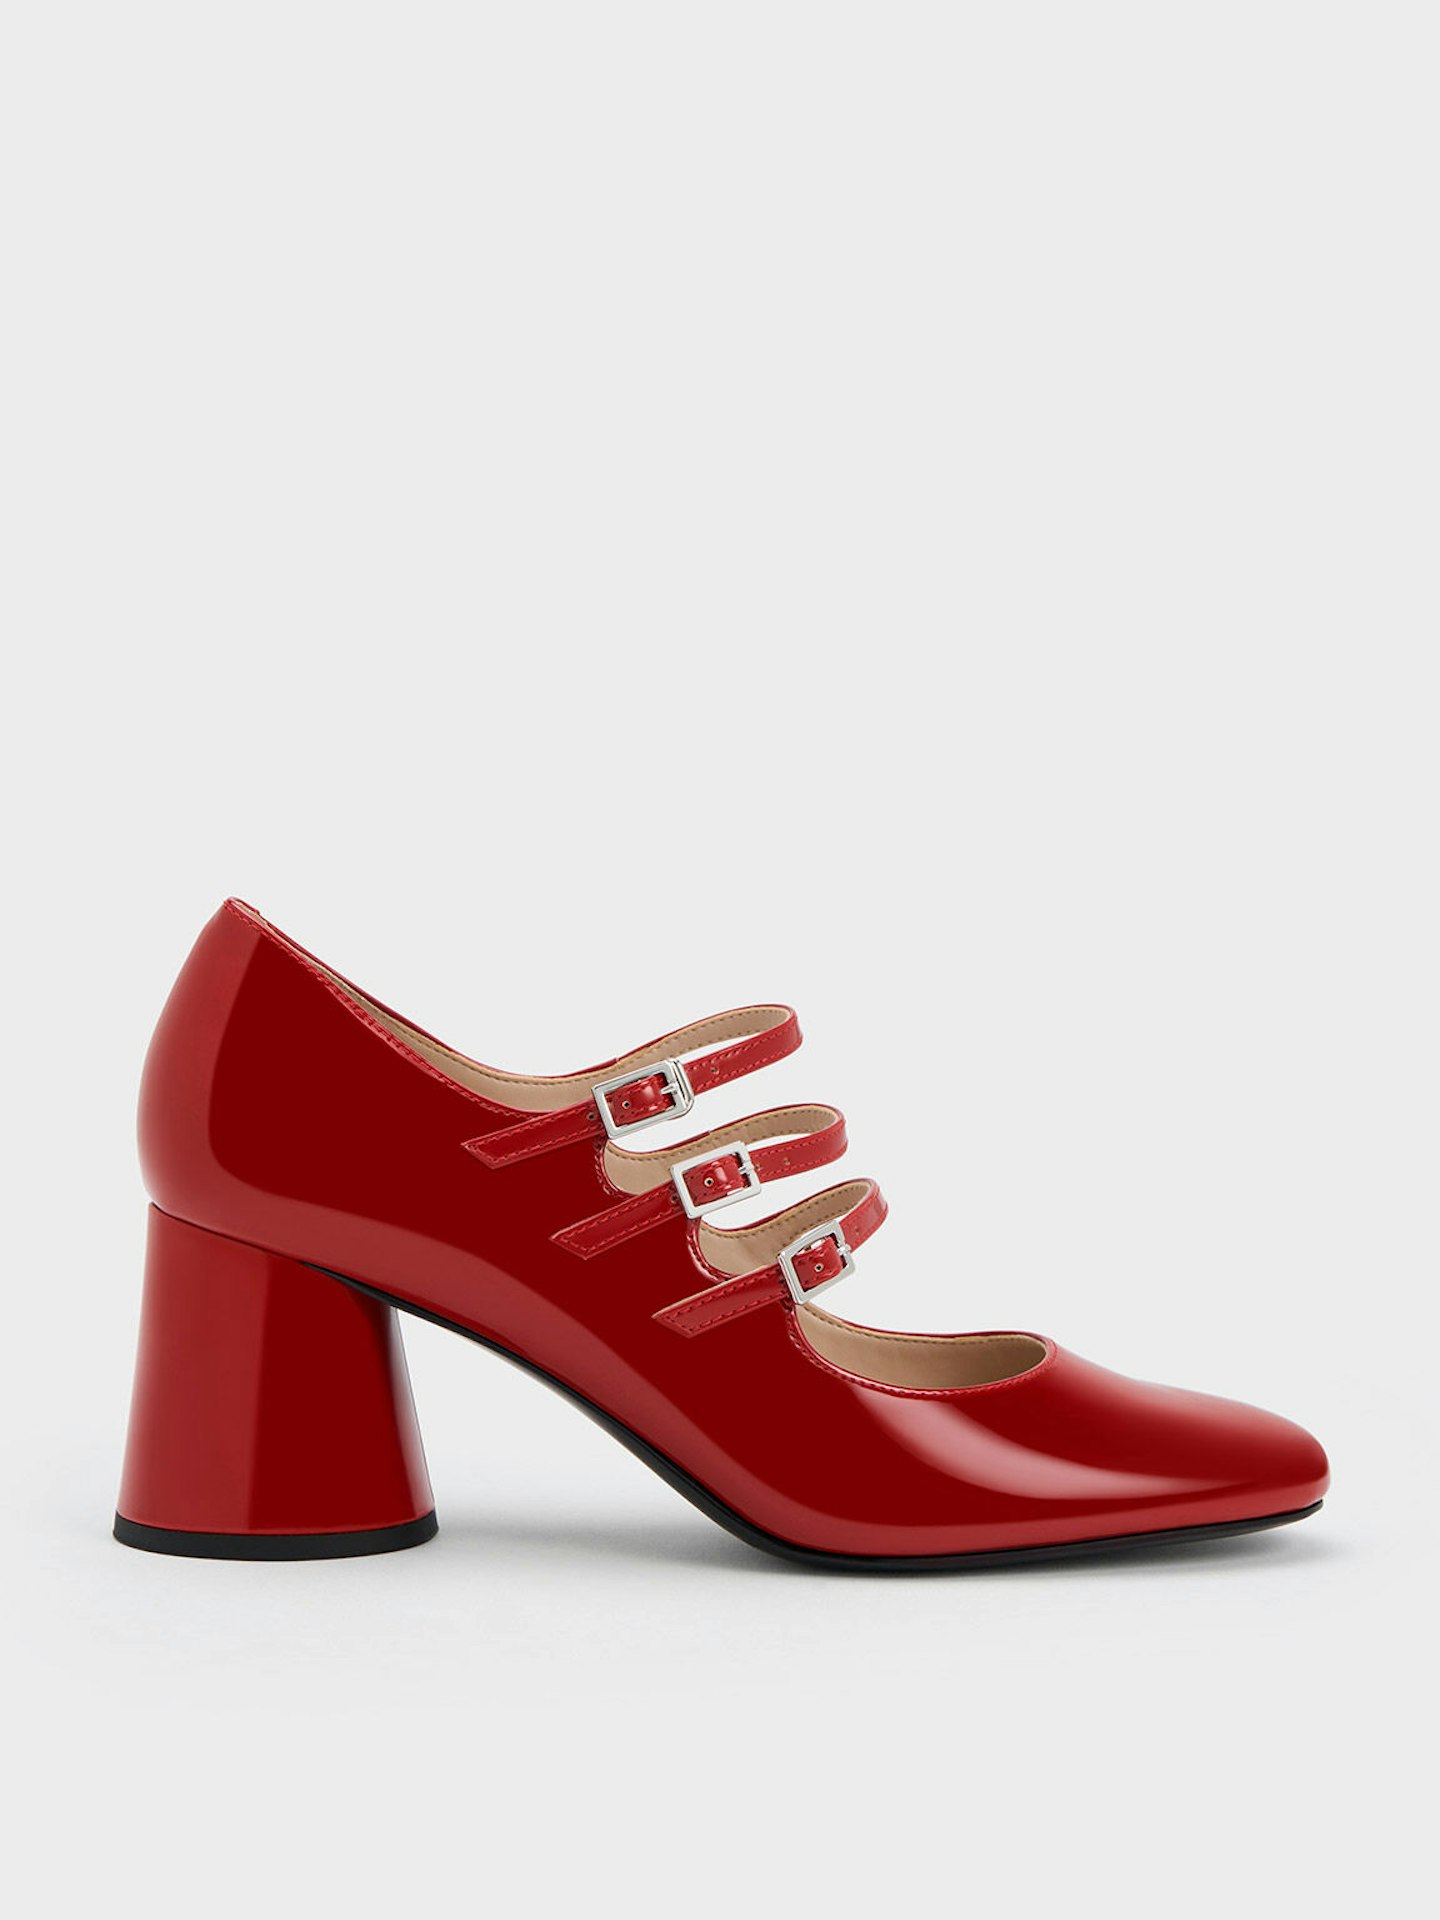 Charles & Keith, Claudie Patent Buckled Mary Janes